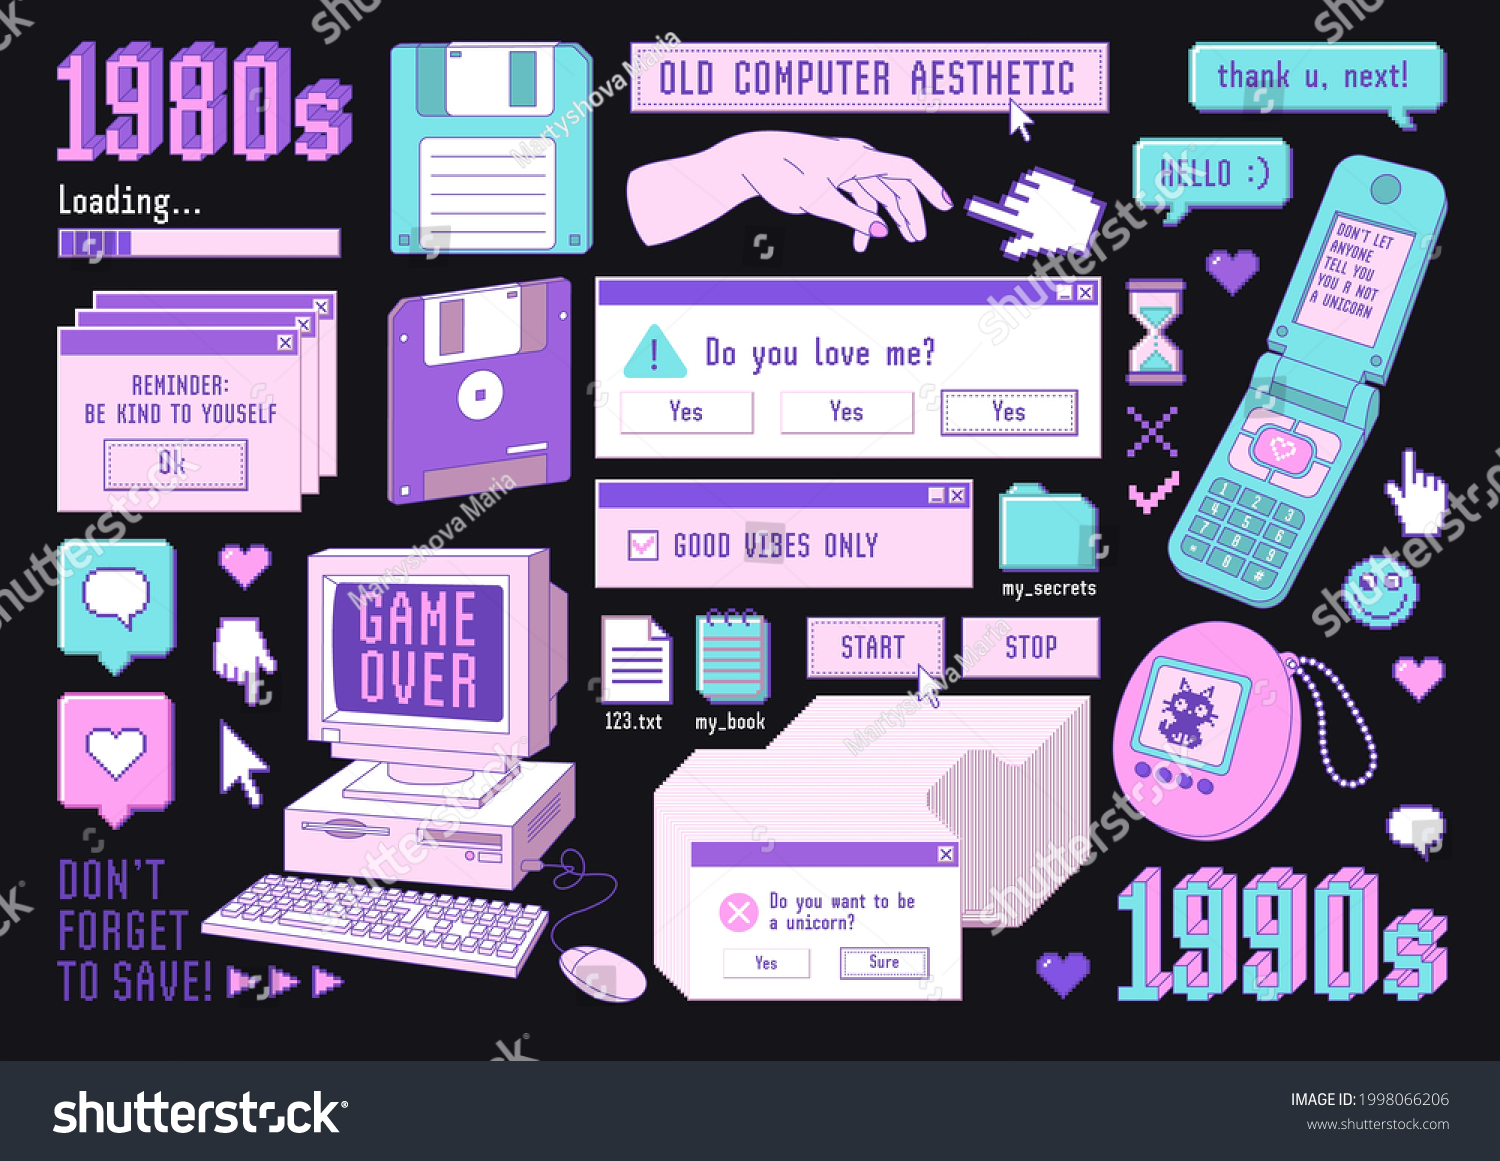 Sticker pack of retro pc elements. Old computer aestethic. Set of user interface elements and technology illustration in trendy retrowave style. Nostalgia for 1980s -1990s. #1998066206